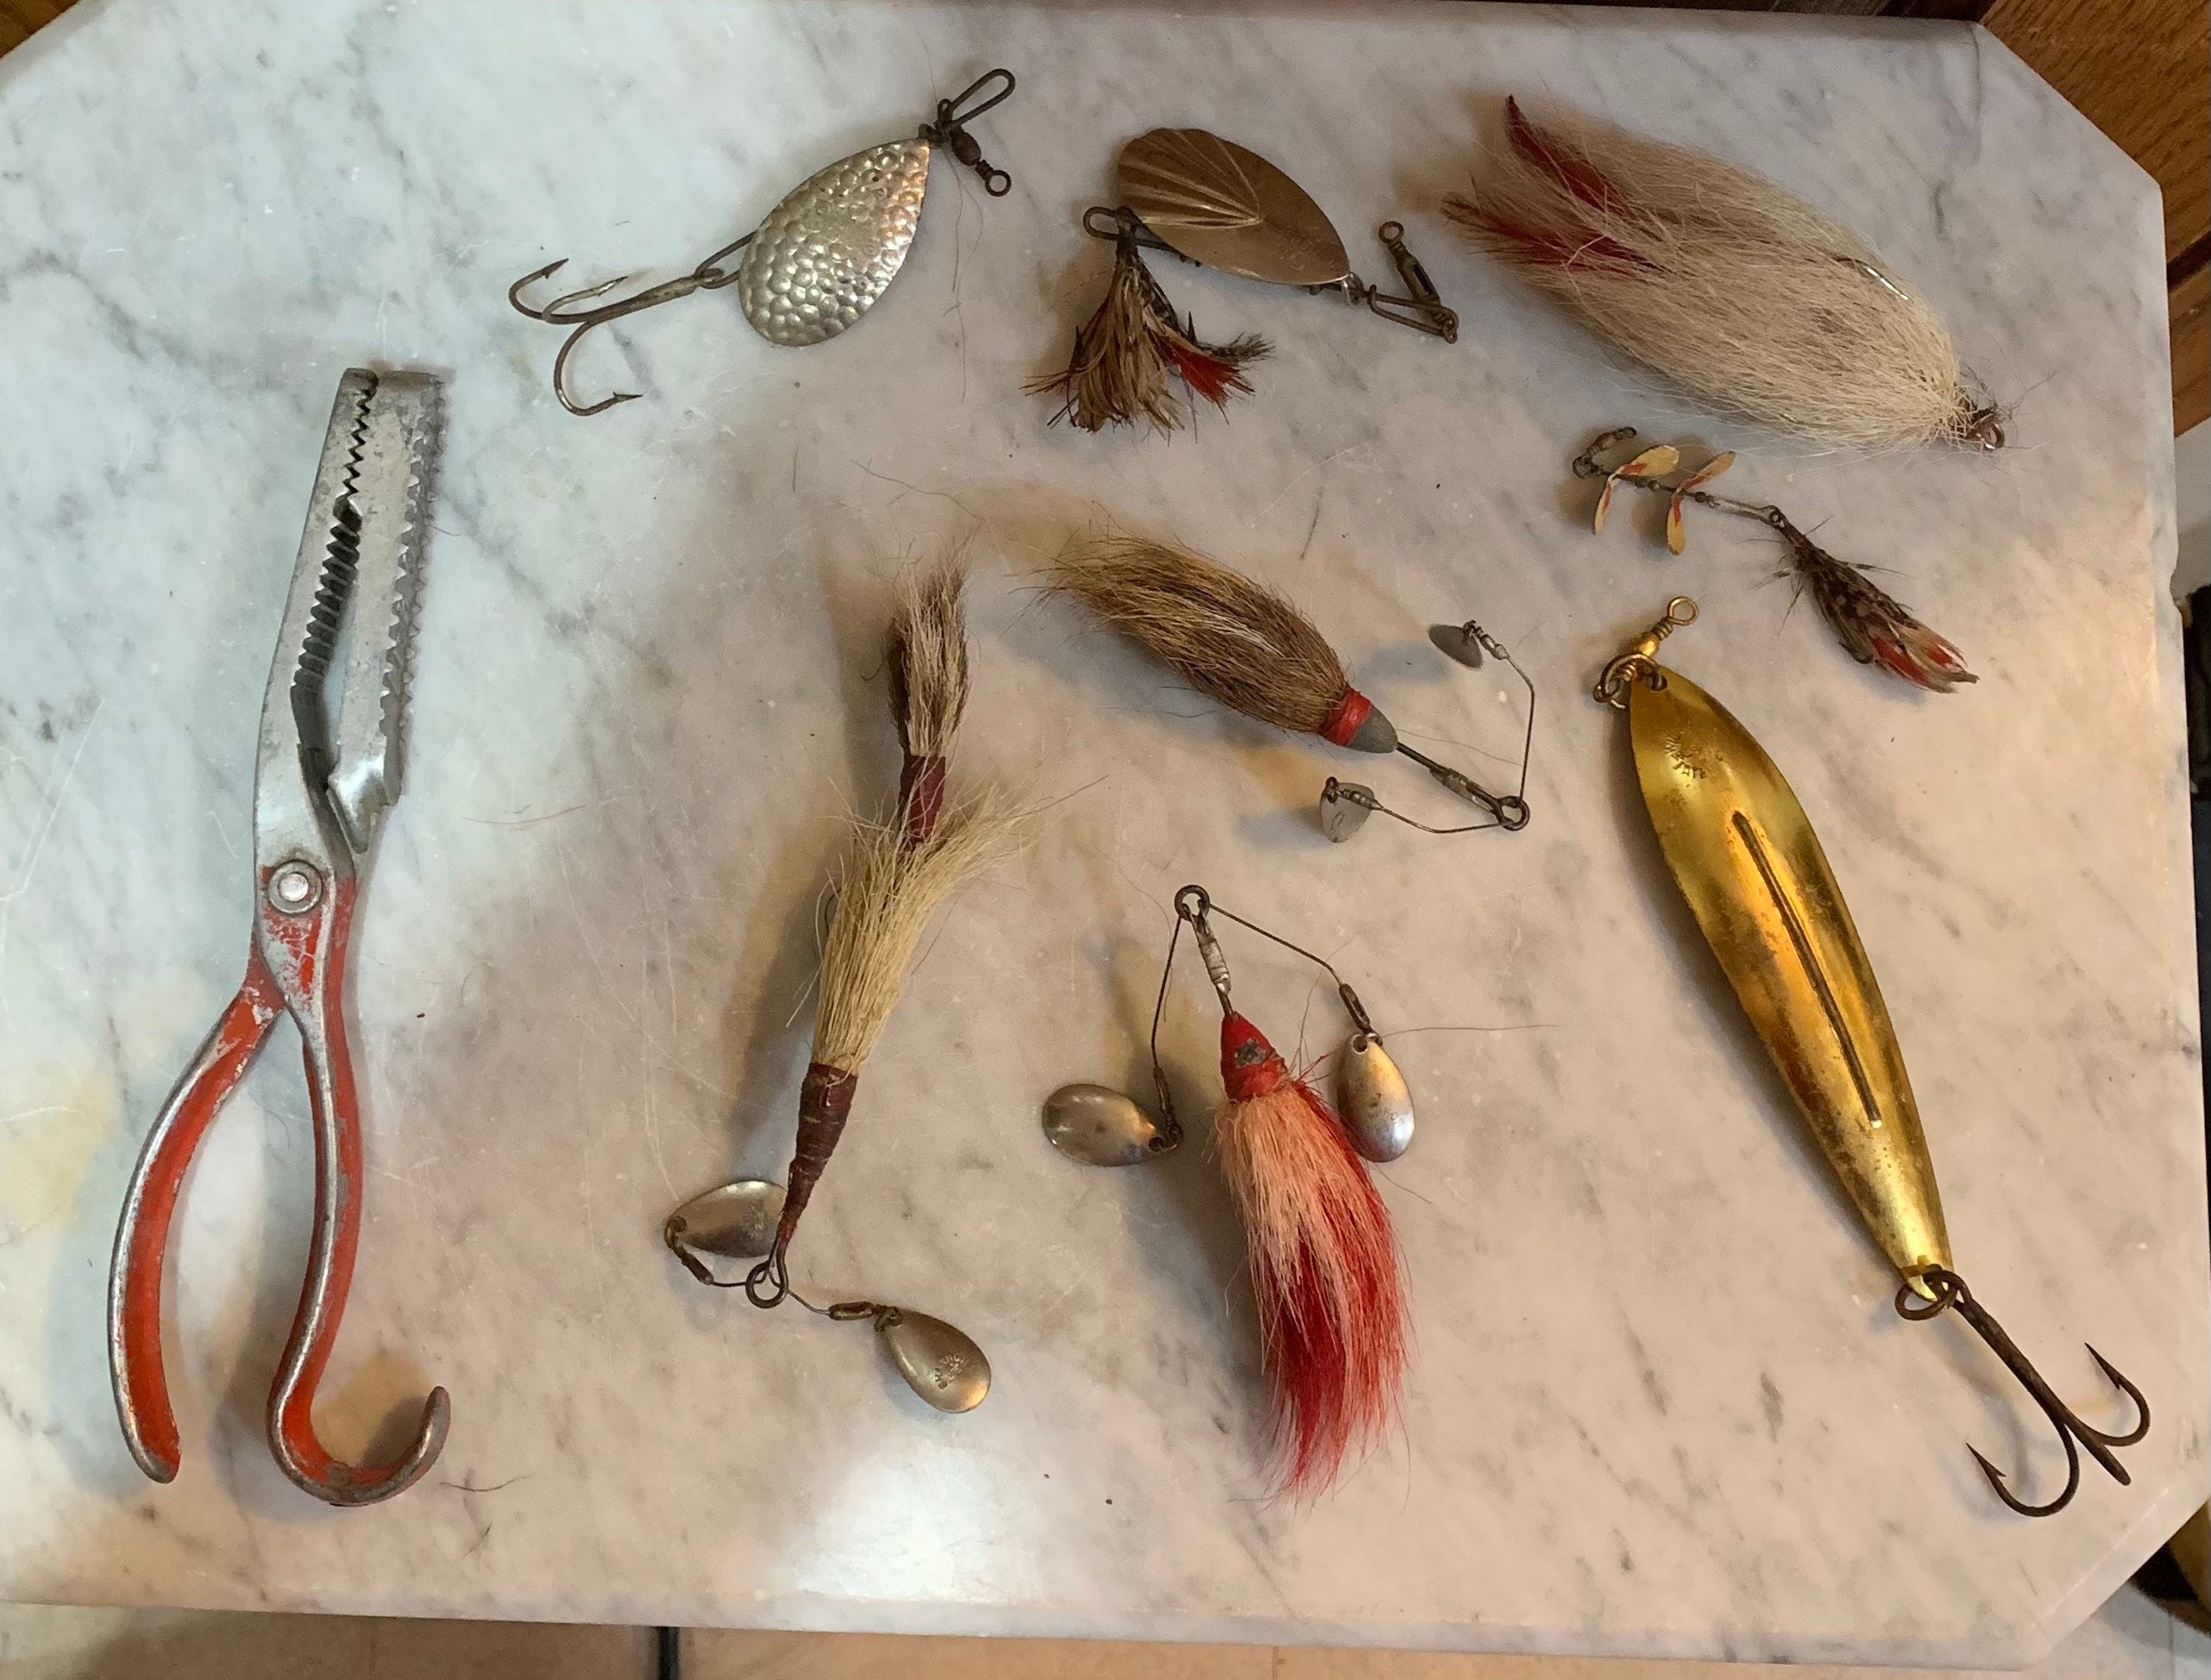 8 Vintage/antique Fishing Lures and Fish Gripper. Pflueger, 4